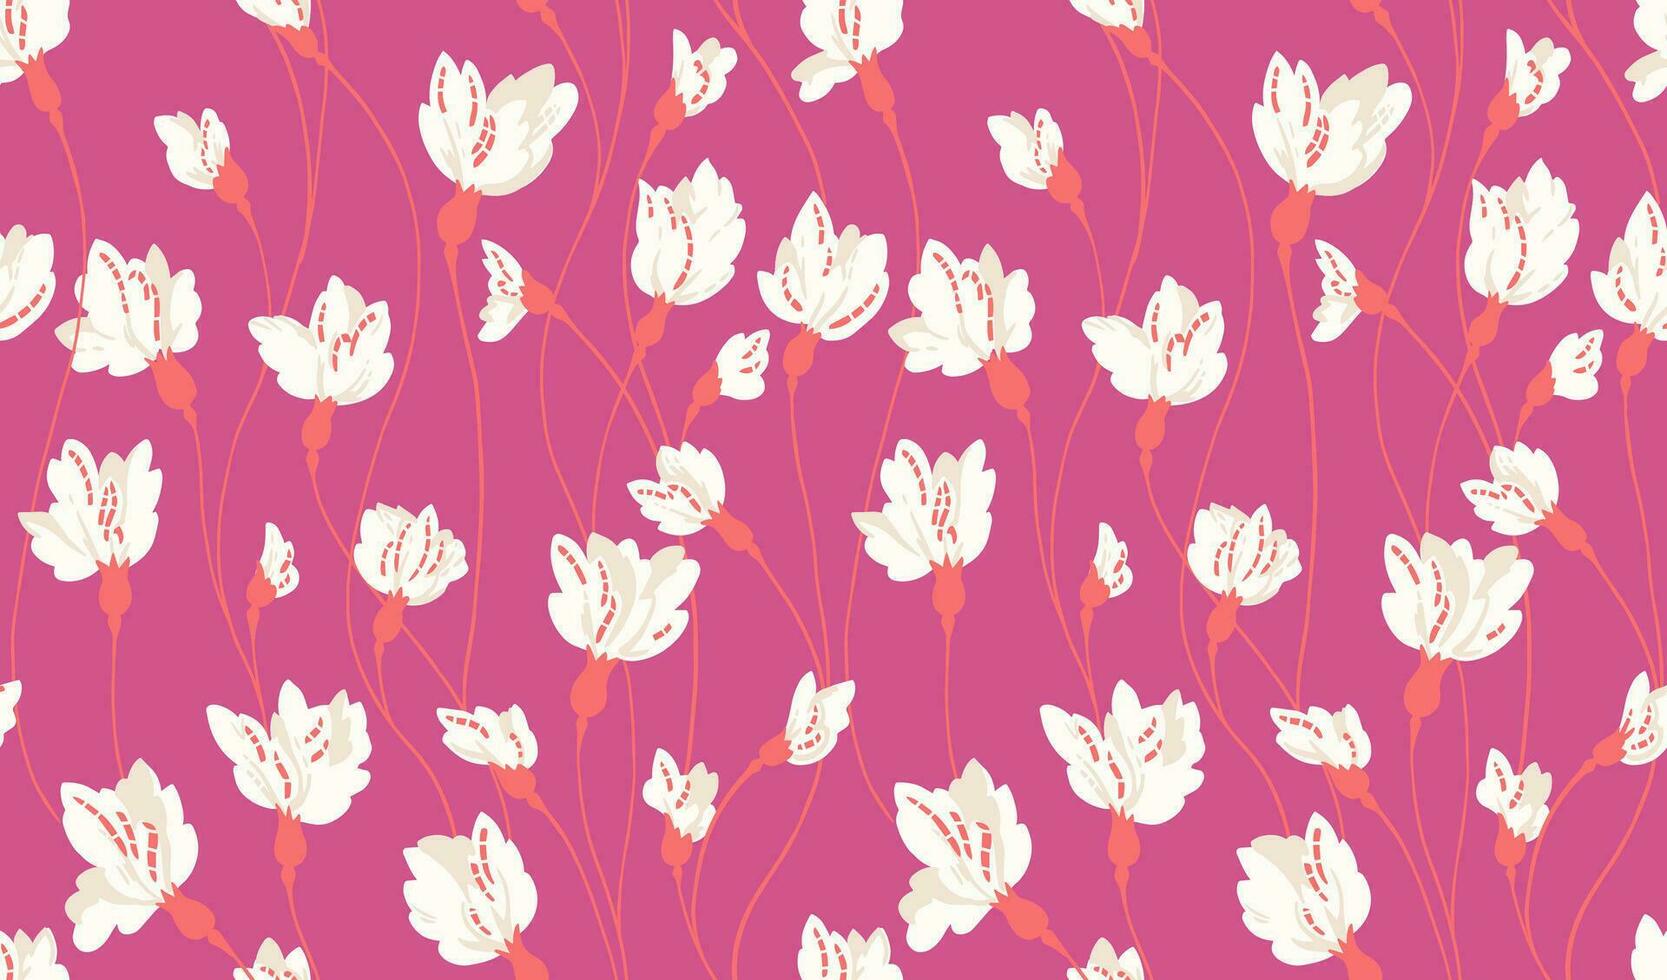 Seamless simple creative flowers buds with branches pattern. Vector hand drawn. Colorful abstract ditsy floral background. Design for fashion, textile, fabric, wallpaper, surface design